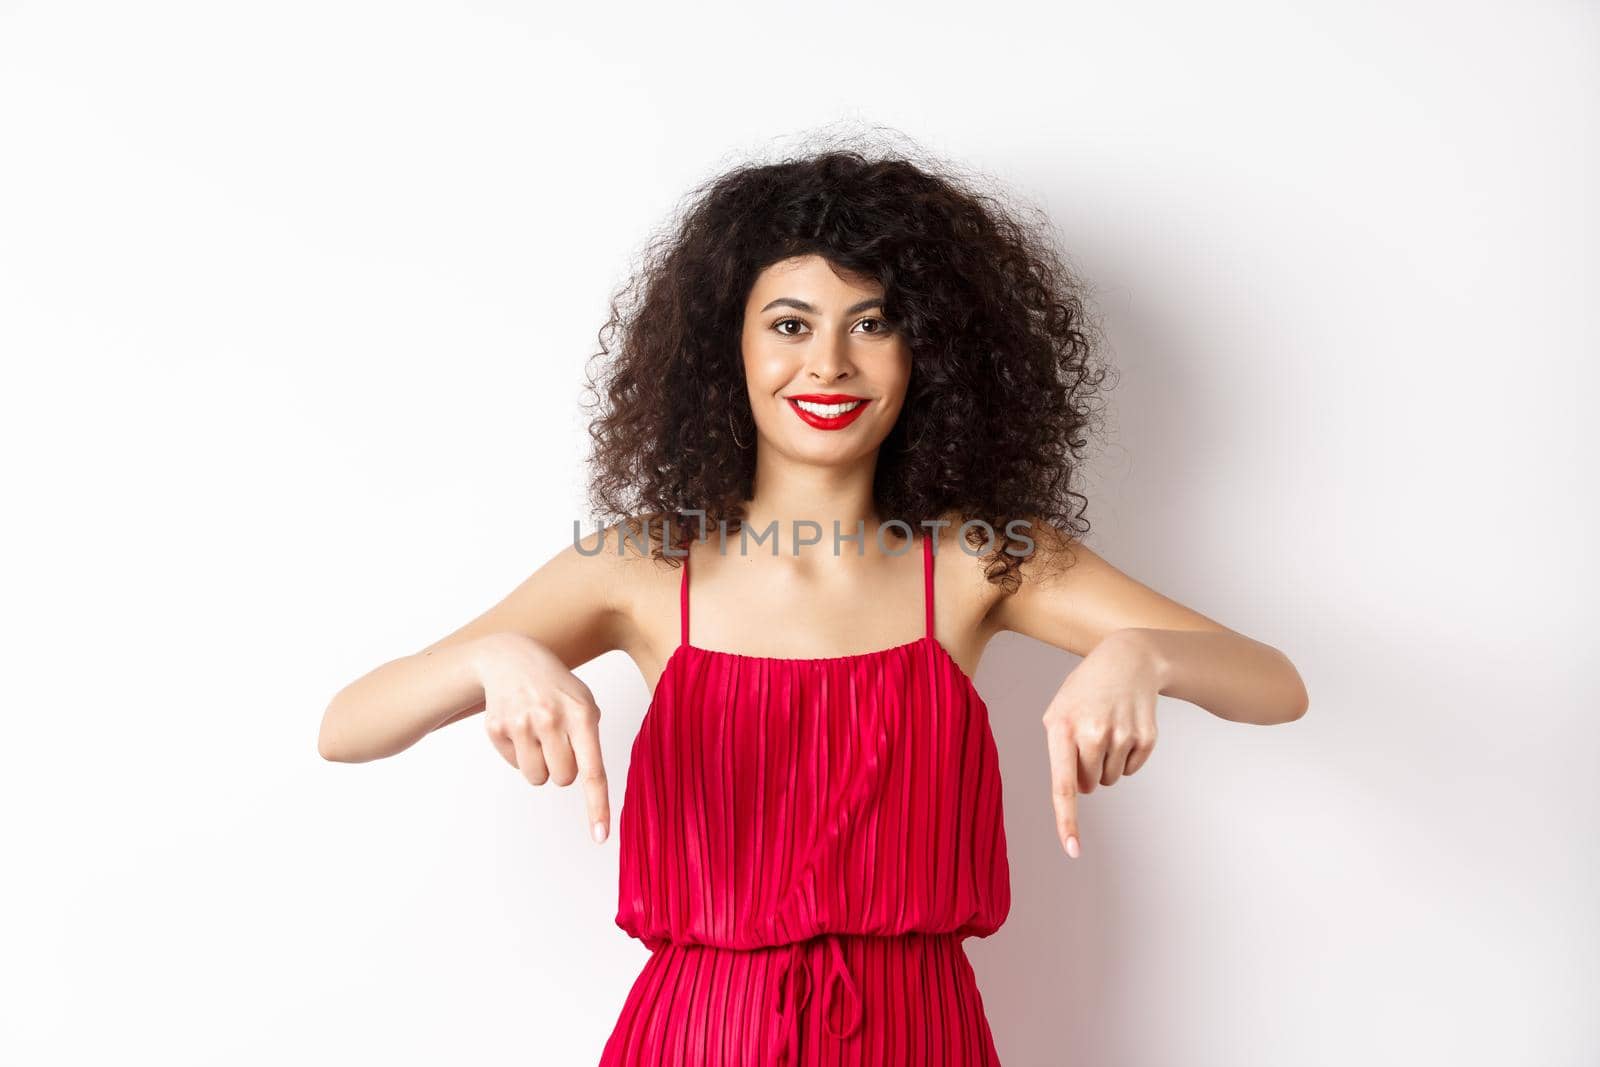 Attractive female model in red dress and makeup, pointing fingers down and smiling, showing advertisement, standing over white background.